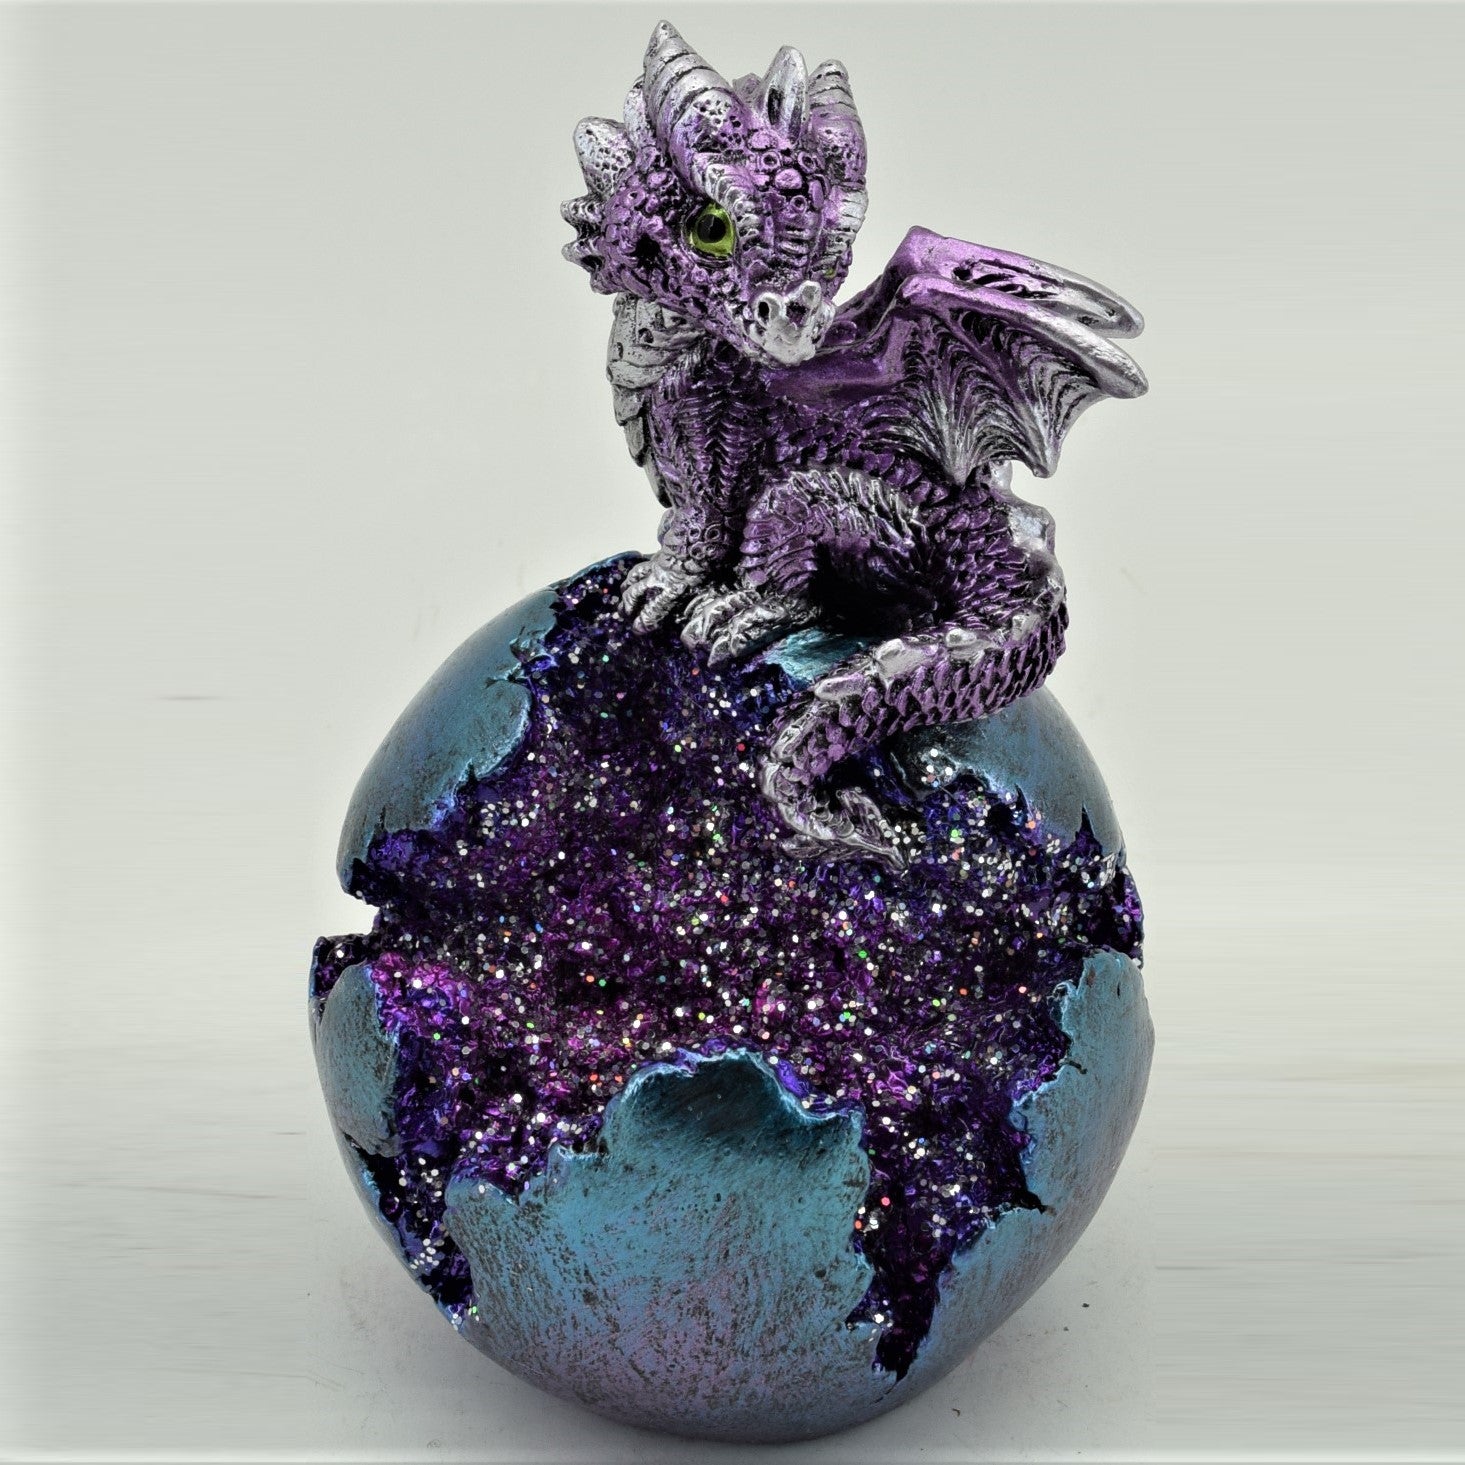 Purple Baby Dragon on Hatched Egg - Rivendell Shop